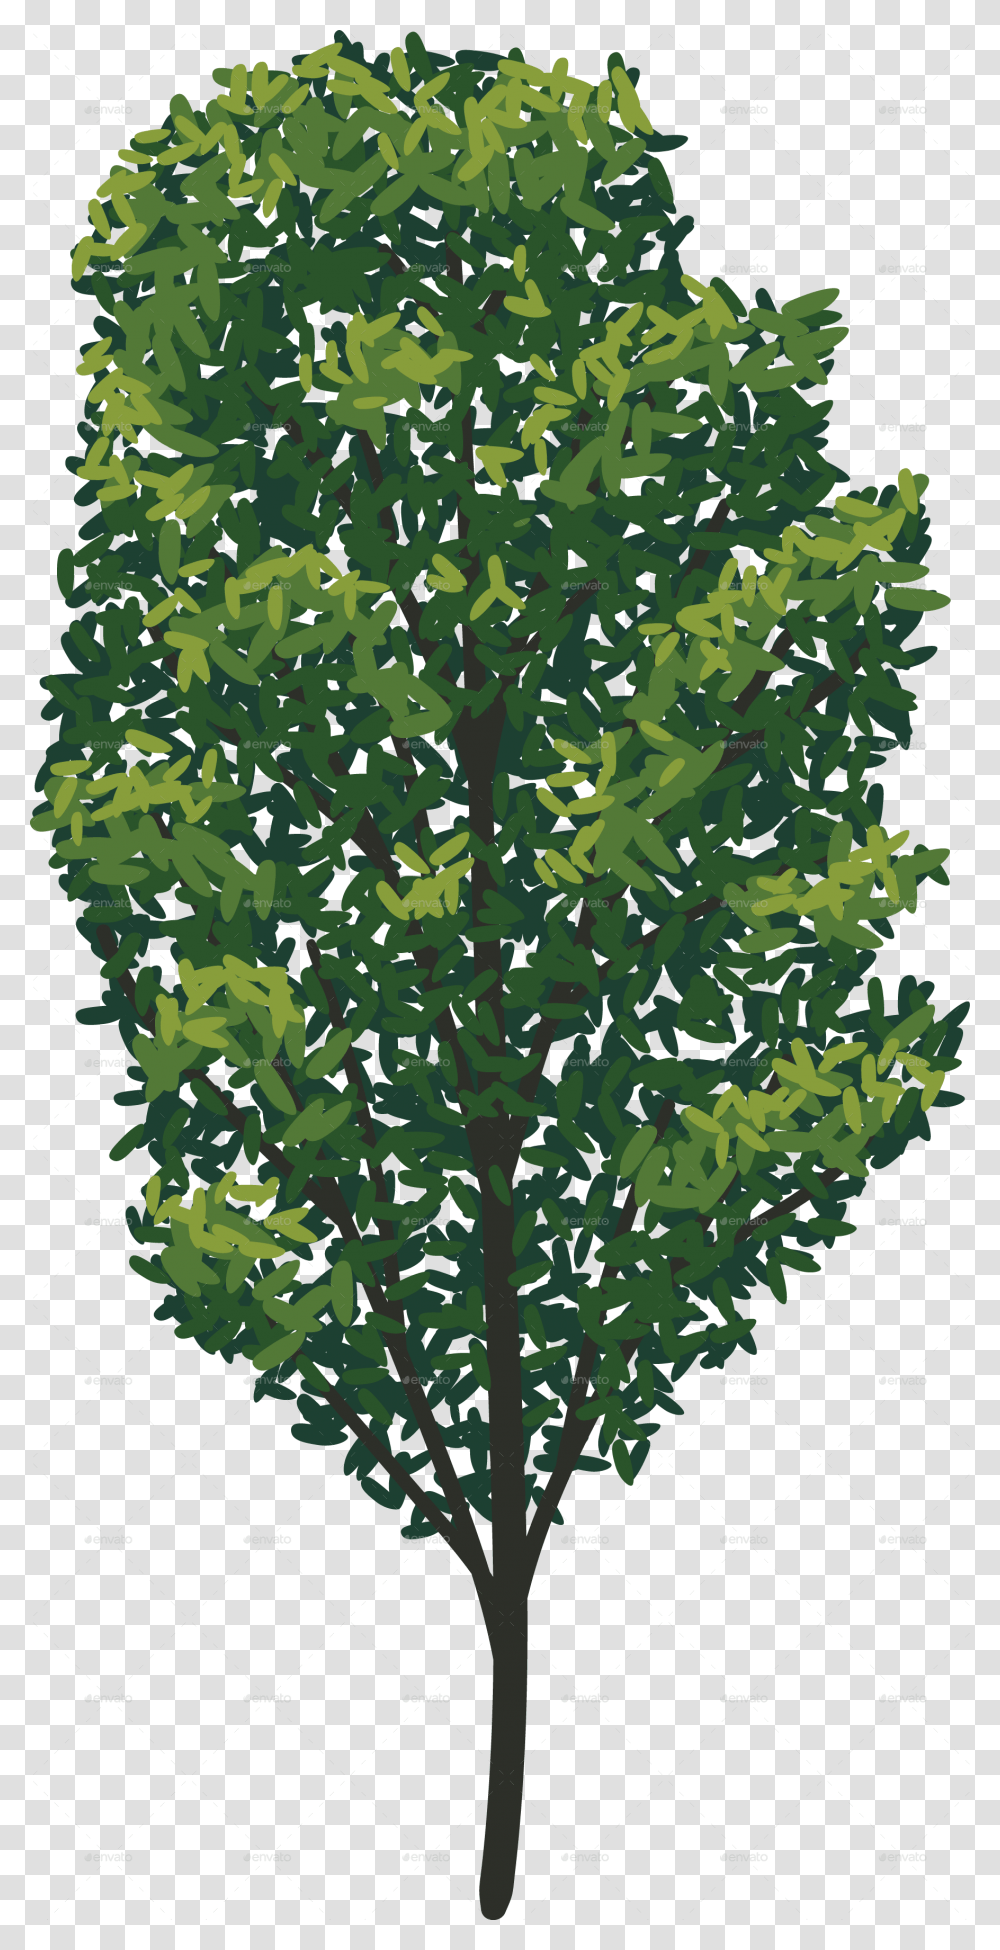 Tree 15 No Stroke American Holly, Military, Military Uniform, Camouflage, Rug Transparent Png